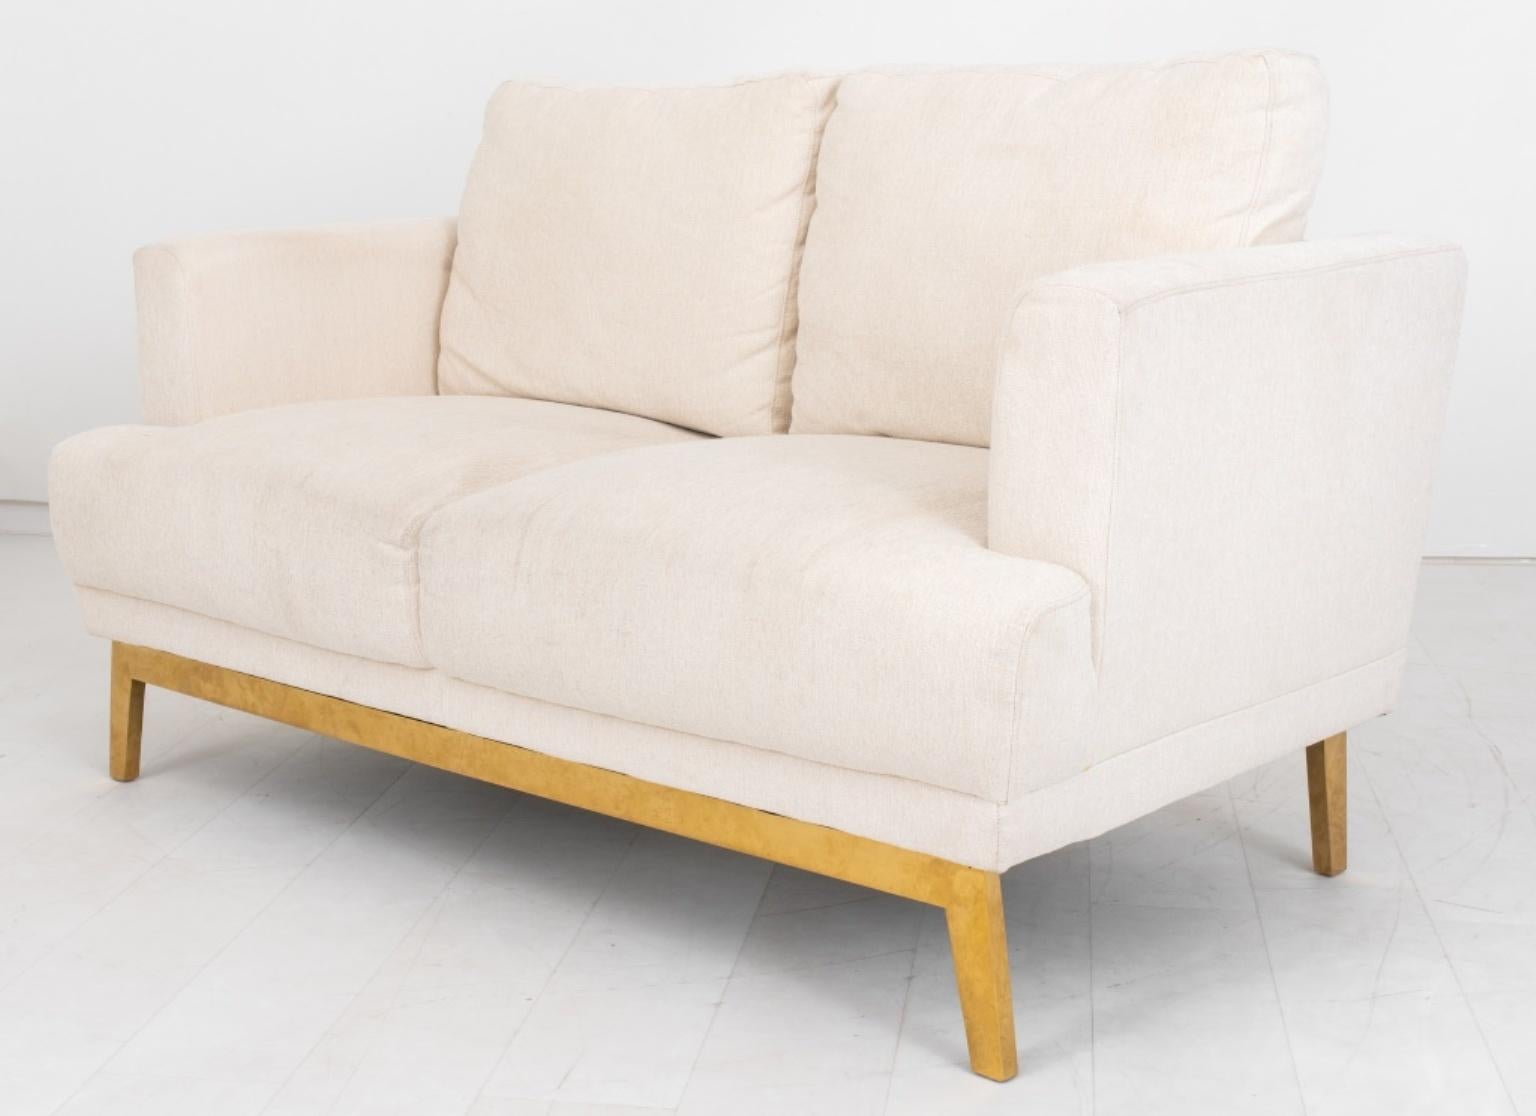 Upholstered white Haitian cotton upholstered two seat sofa on Brass base, with square back and seat between upholstered arms, and four drop in cushions above a brass base with splay feet,. 

Dimensions: 35